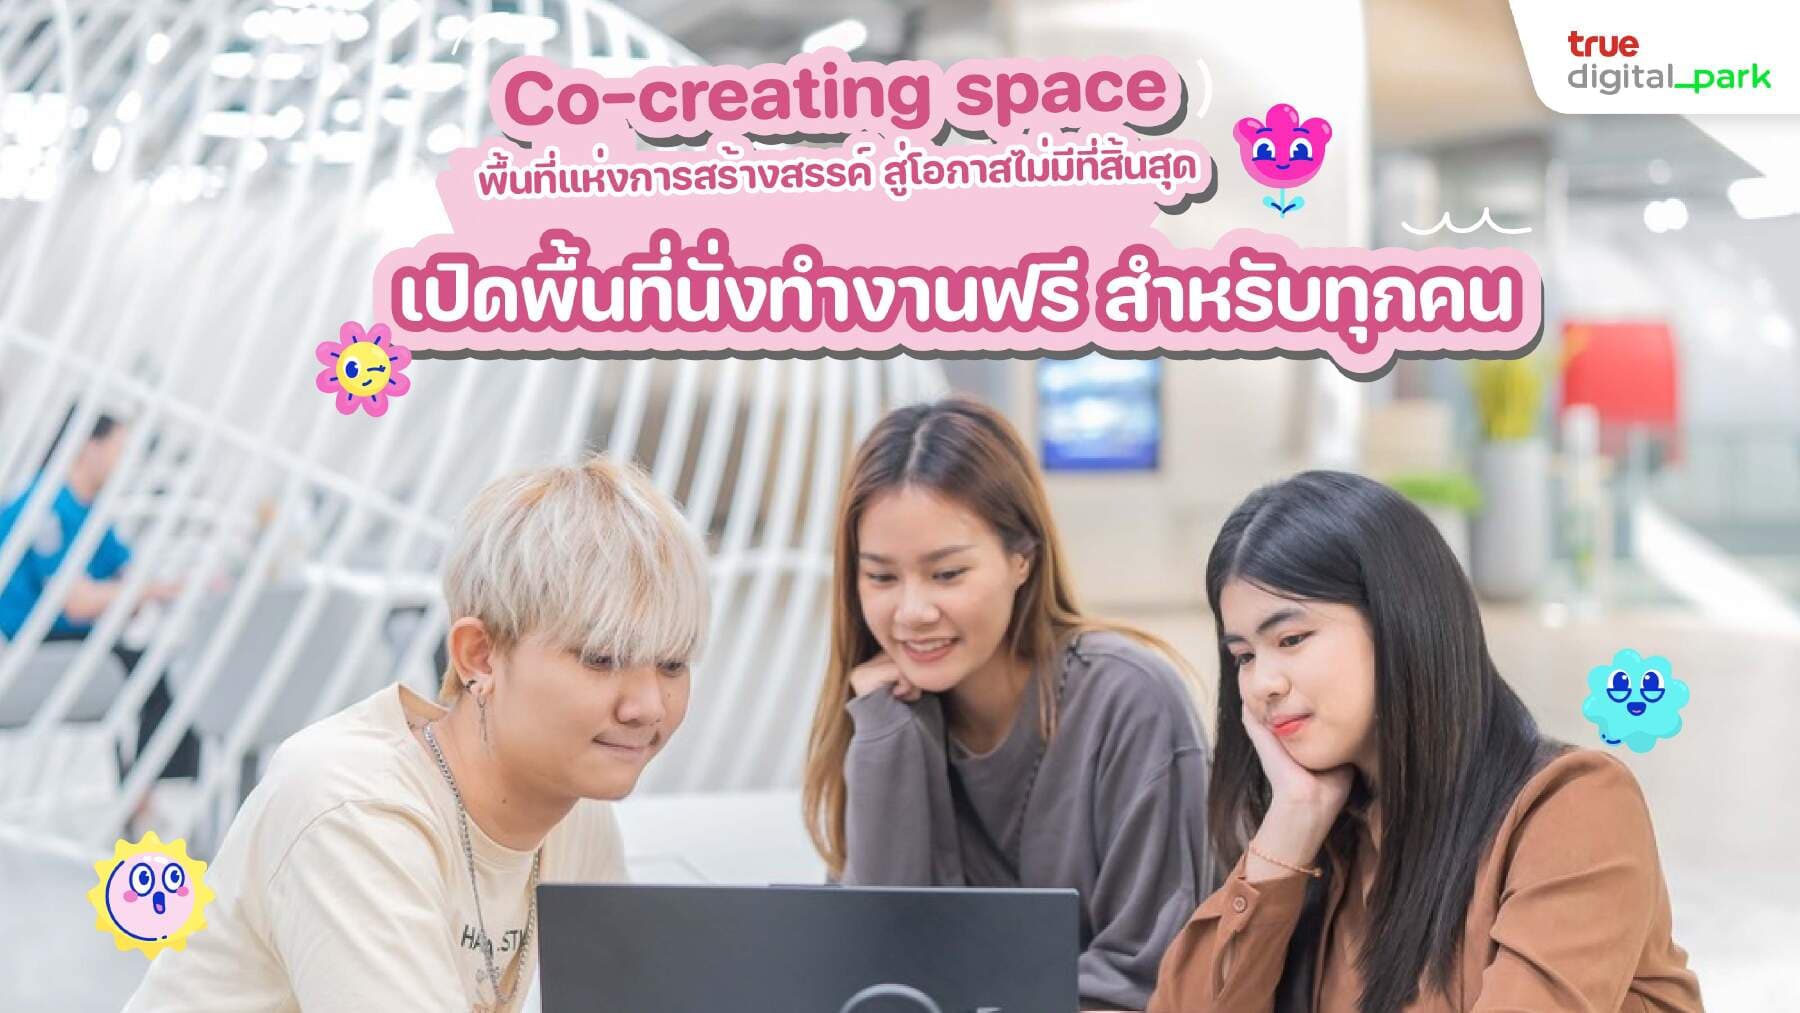 Co-creating space at True Digital Park: Free workspace in Bangkok to create all possibilities